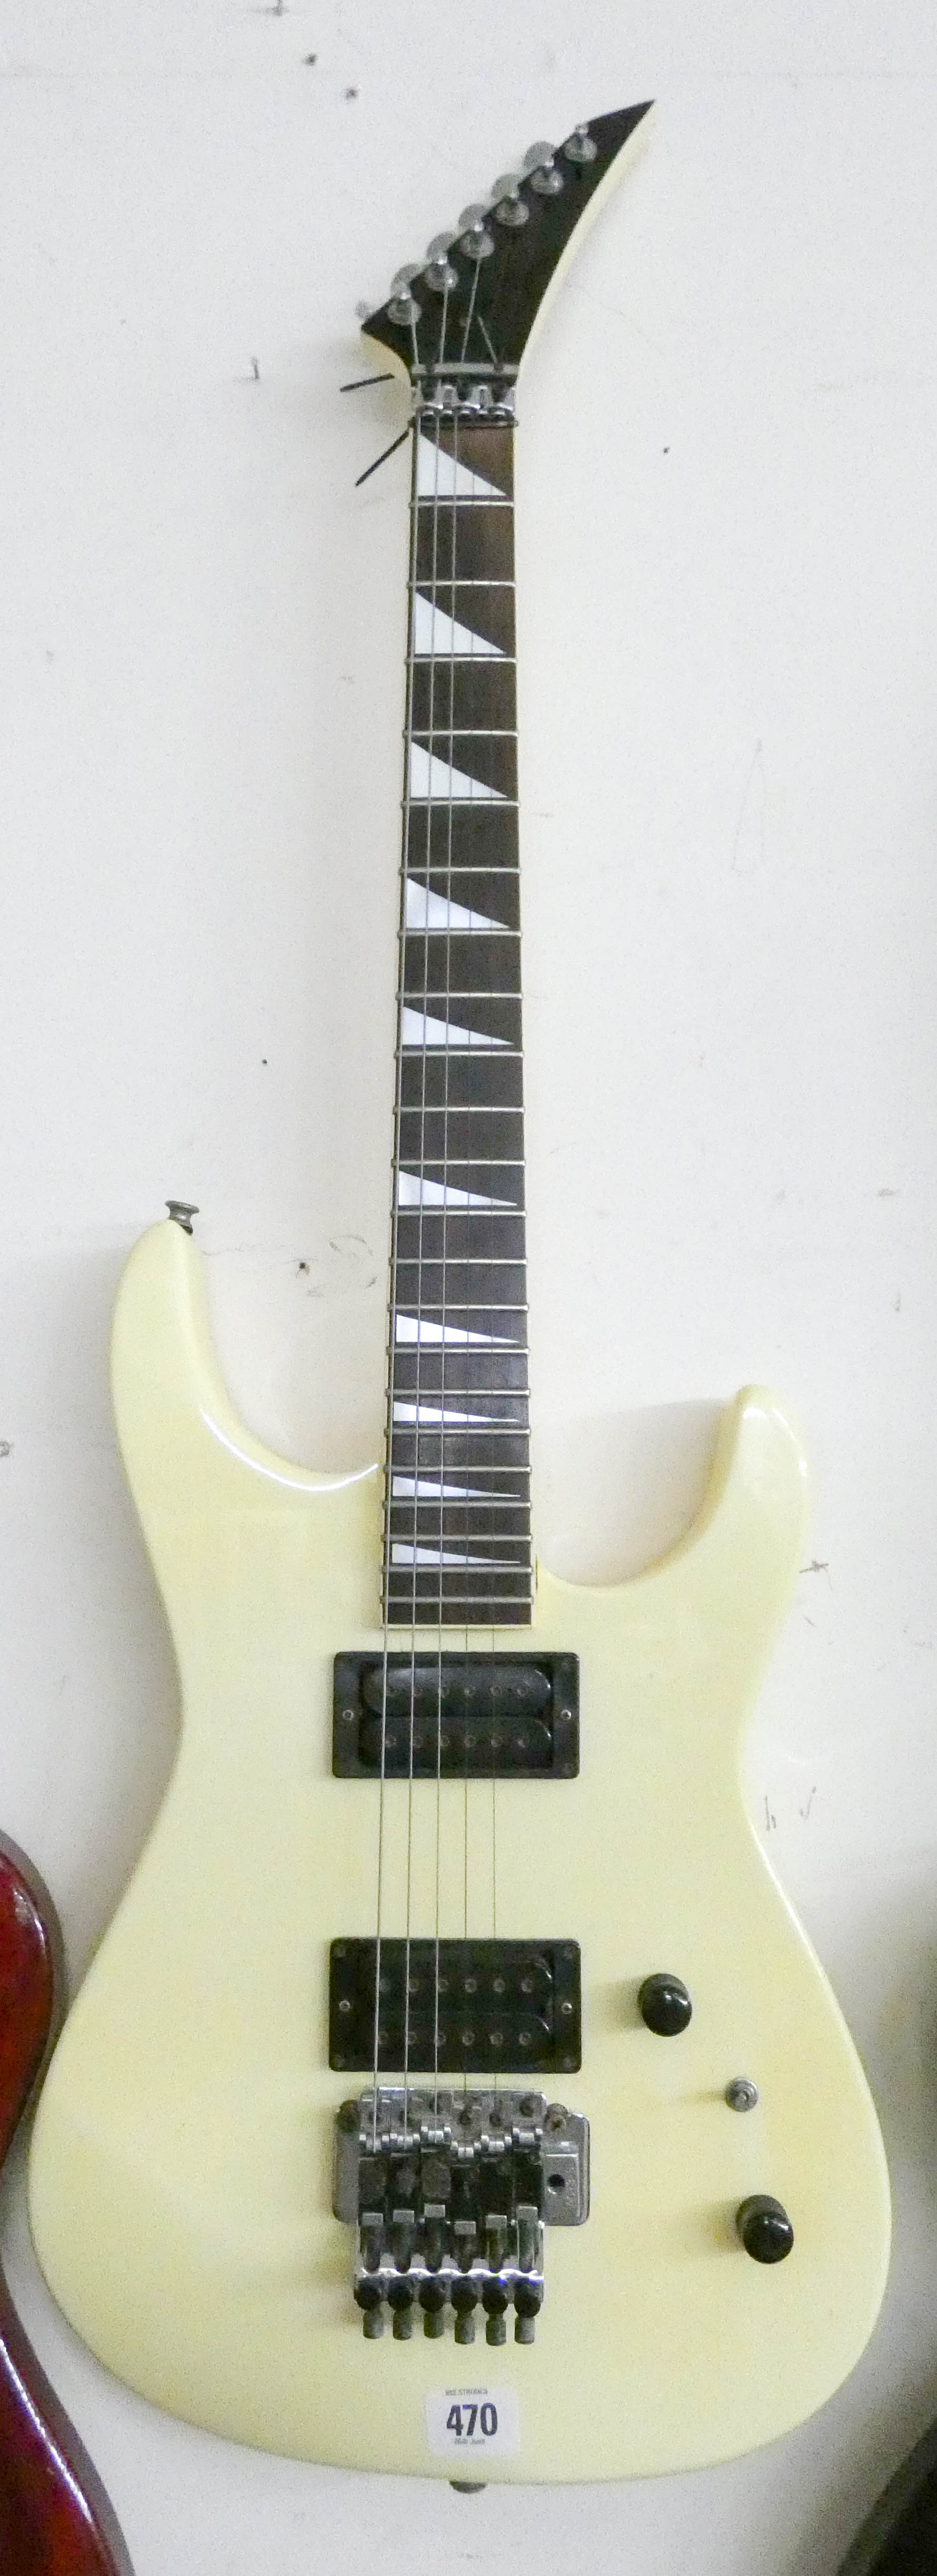 An Aria Pro 2 AC3TS electric guitar with soft carrying case - Image 2 of 5